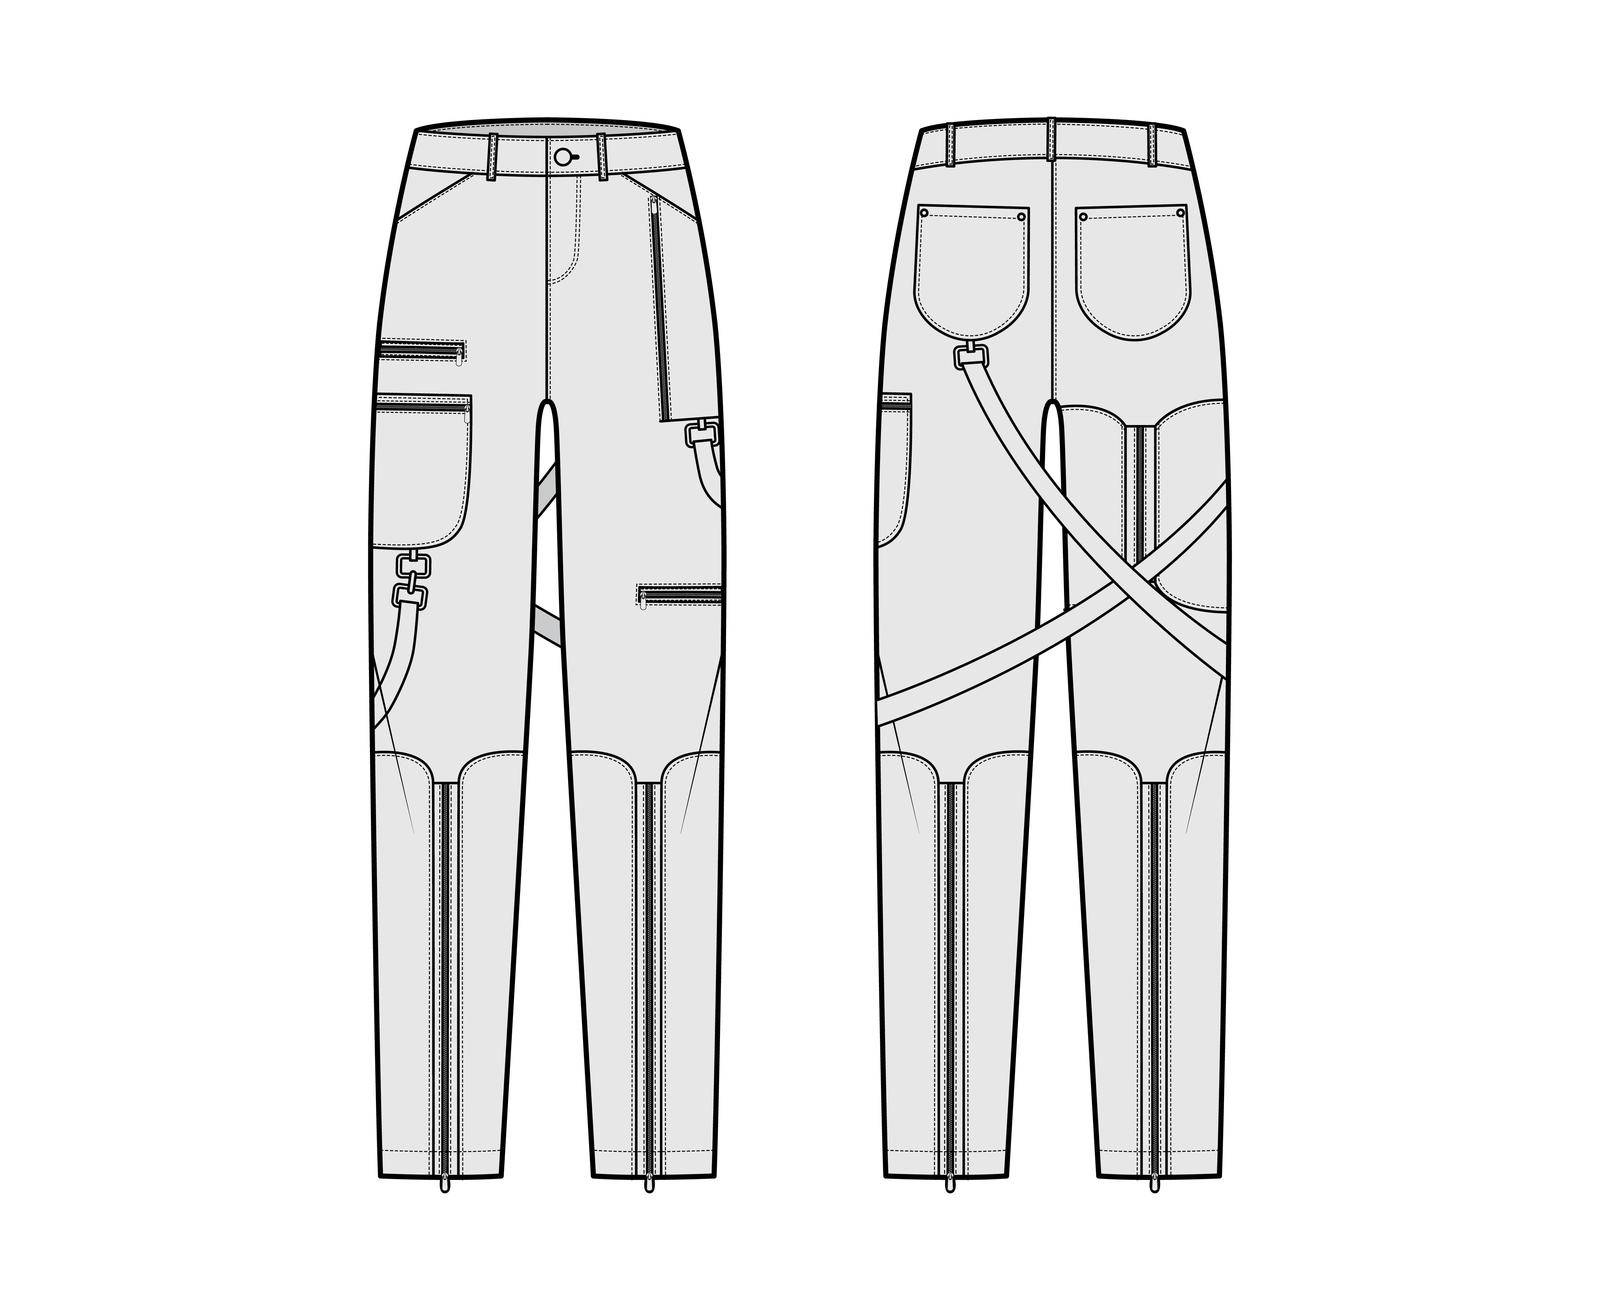 Bondage pants technical fashion illustration with low waist, rise, pockets, belt loops, full lengths Flat bottom apparel by Vectoressa